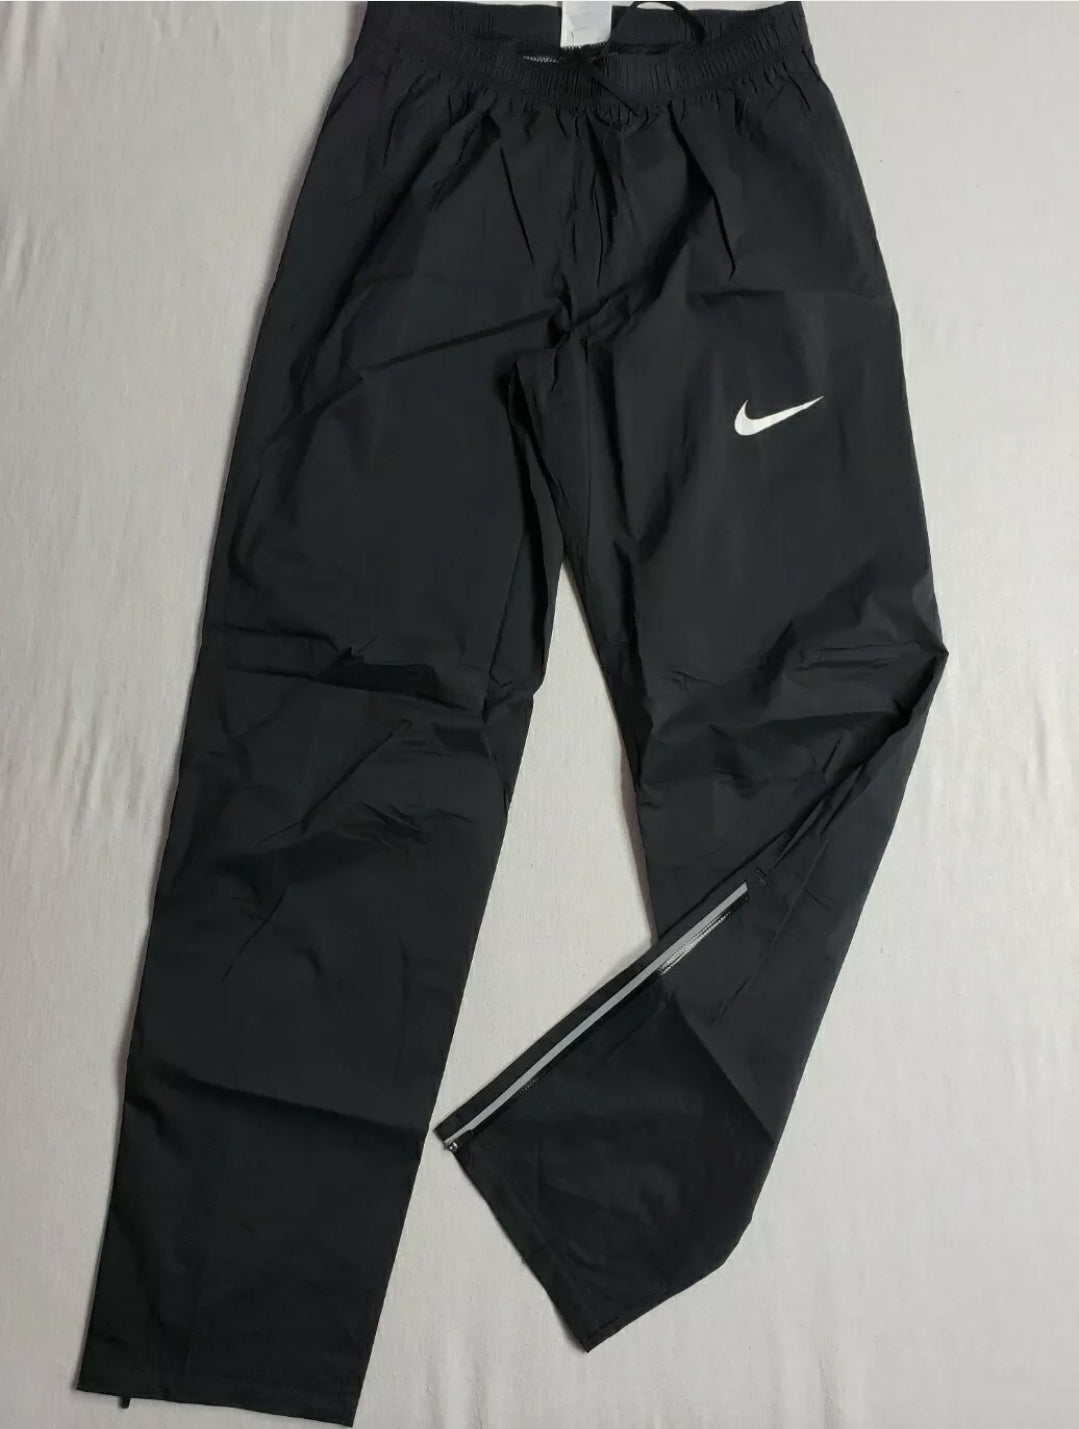 Nike Pro Elite Storm Pants Men New Track and Field